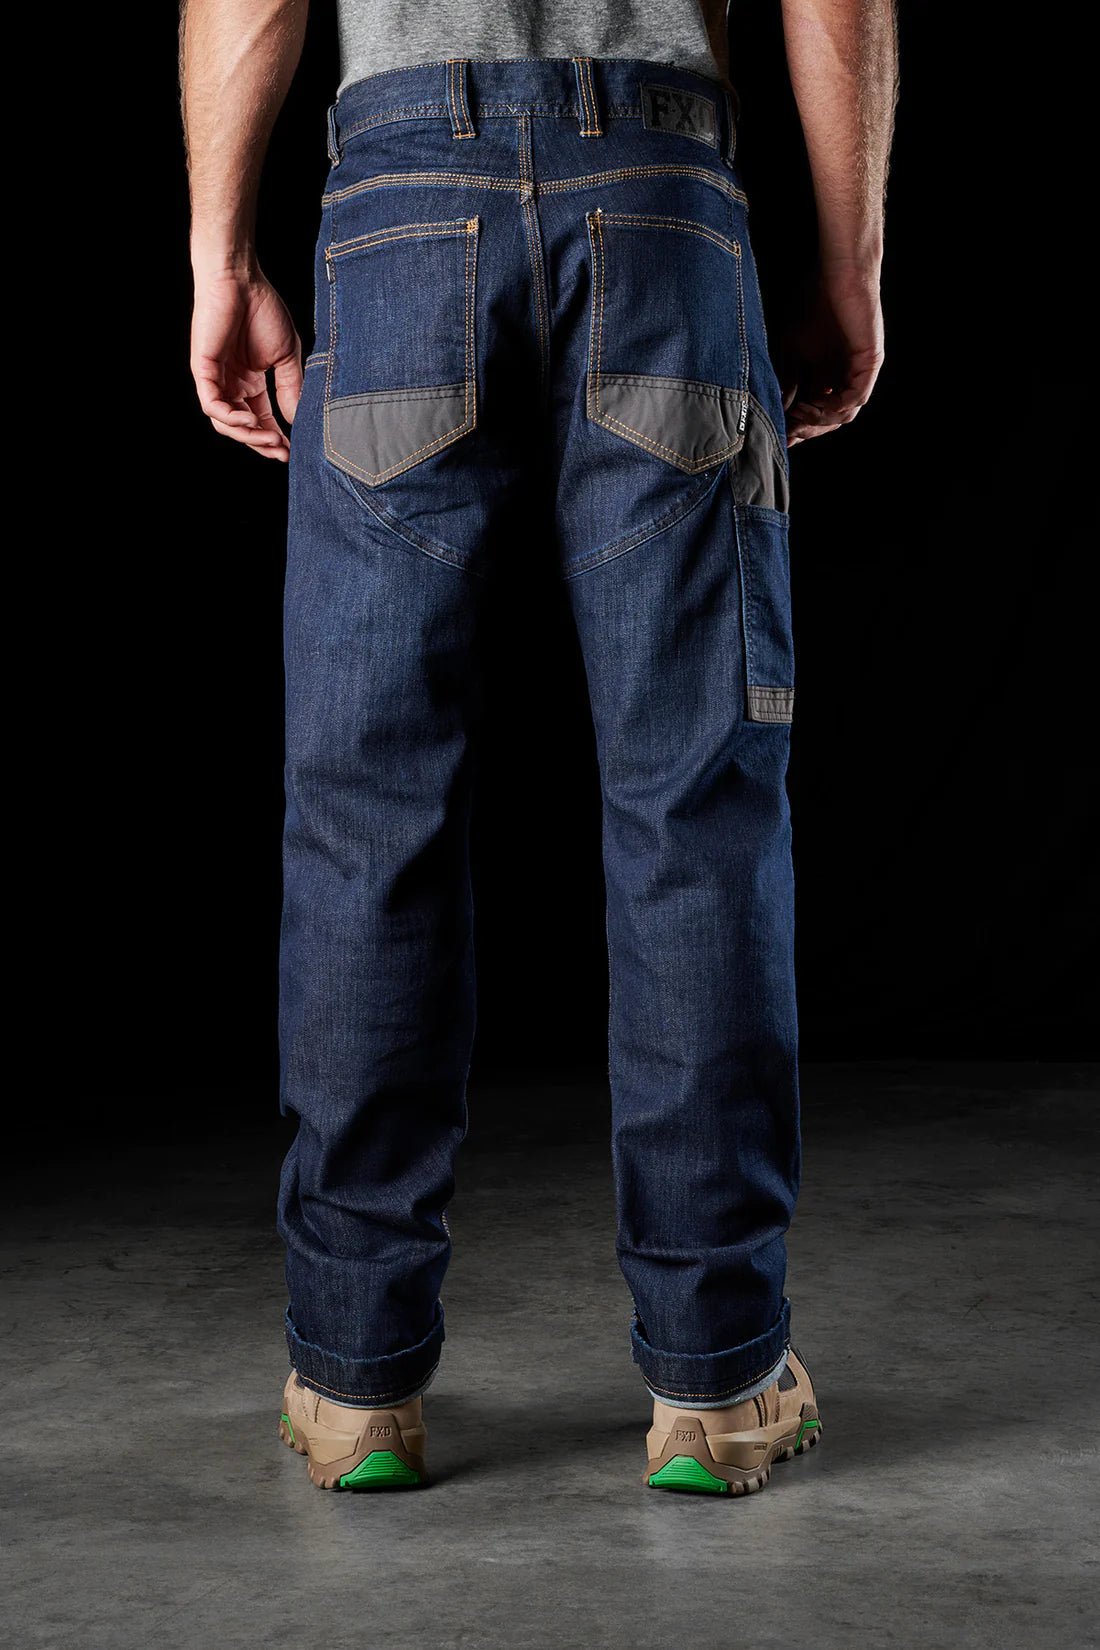 Work Jean With Kneepad Pocket - made by FXD Workwear